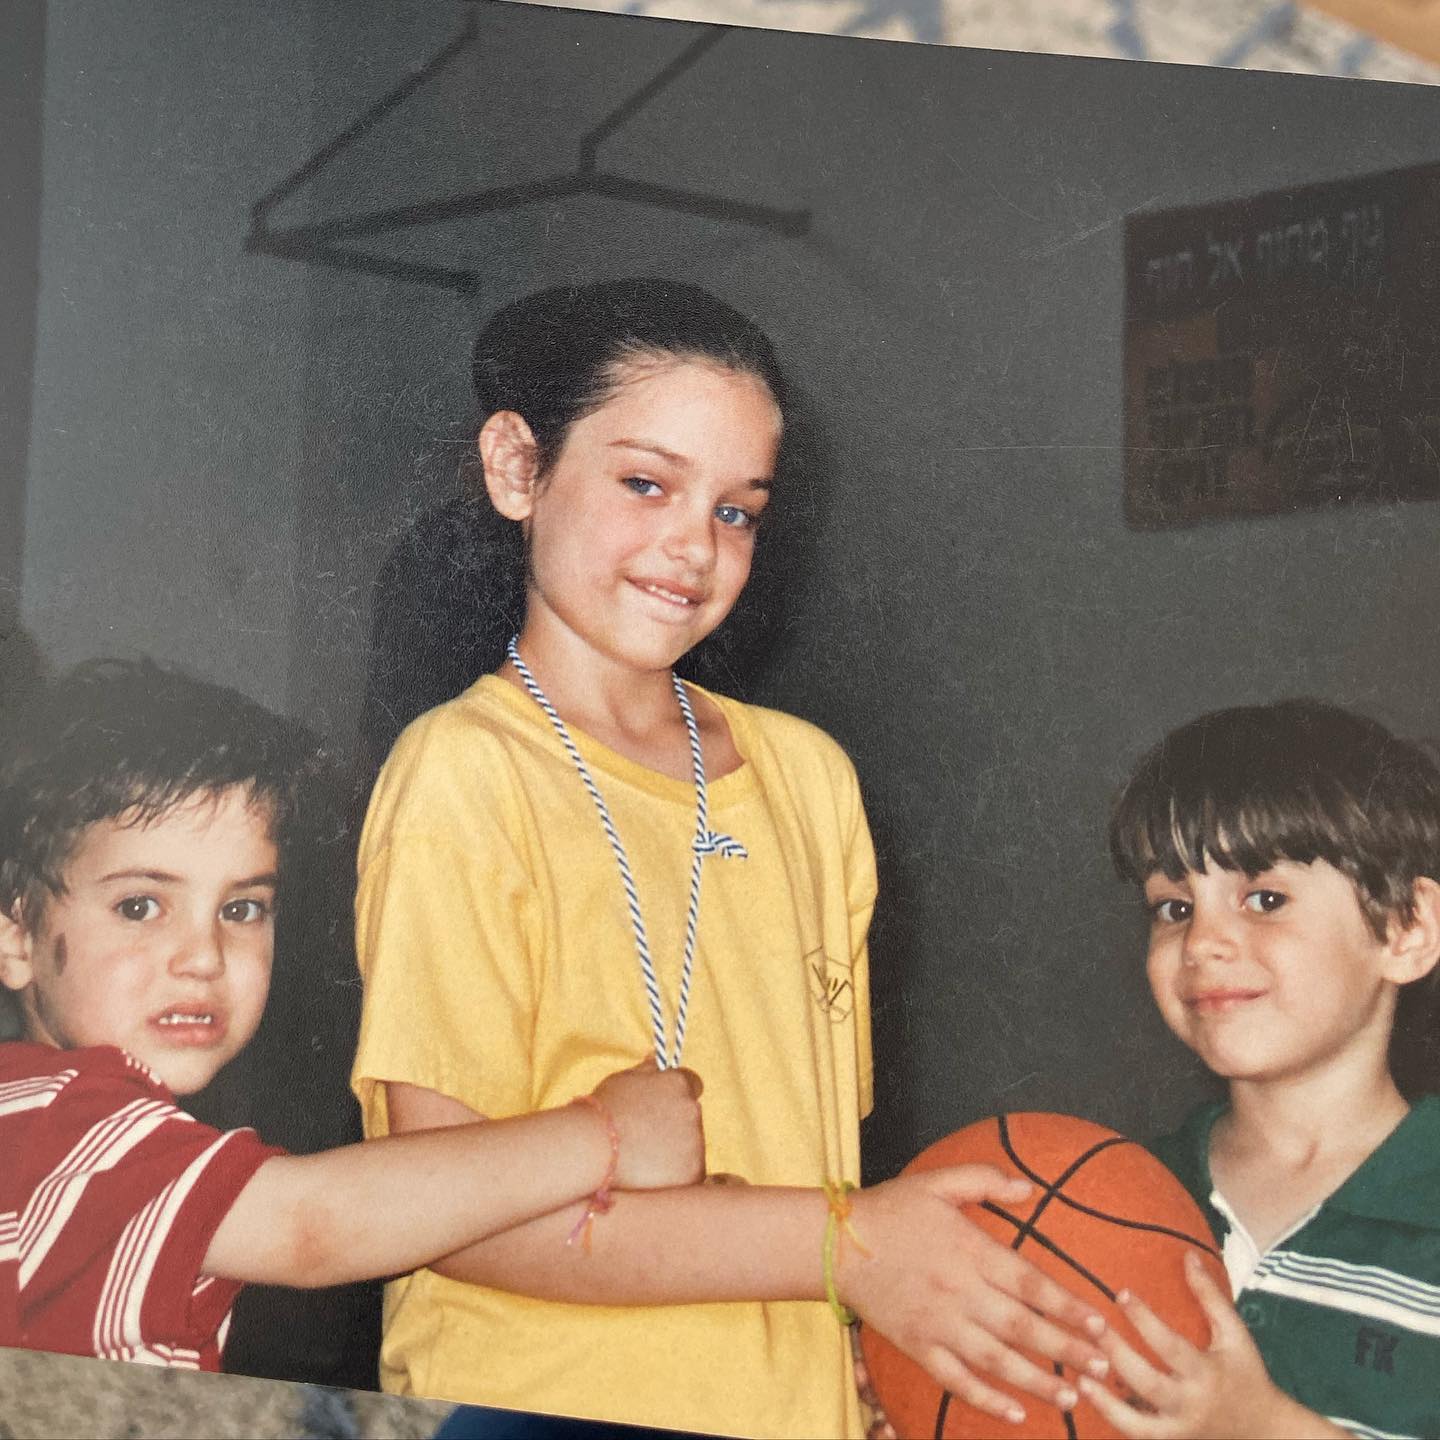 An old picture of Odeya Rush with her two siblings